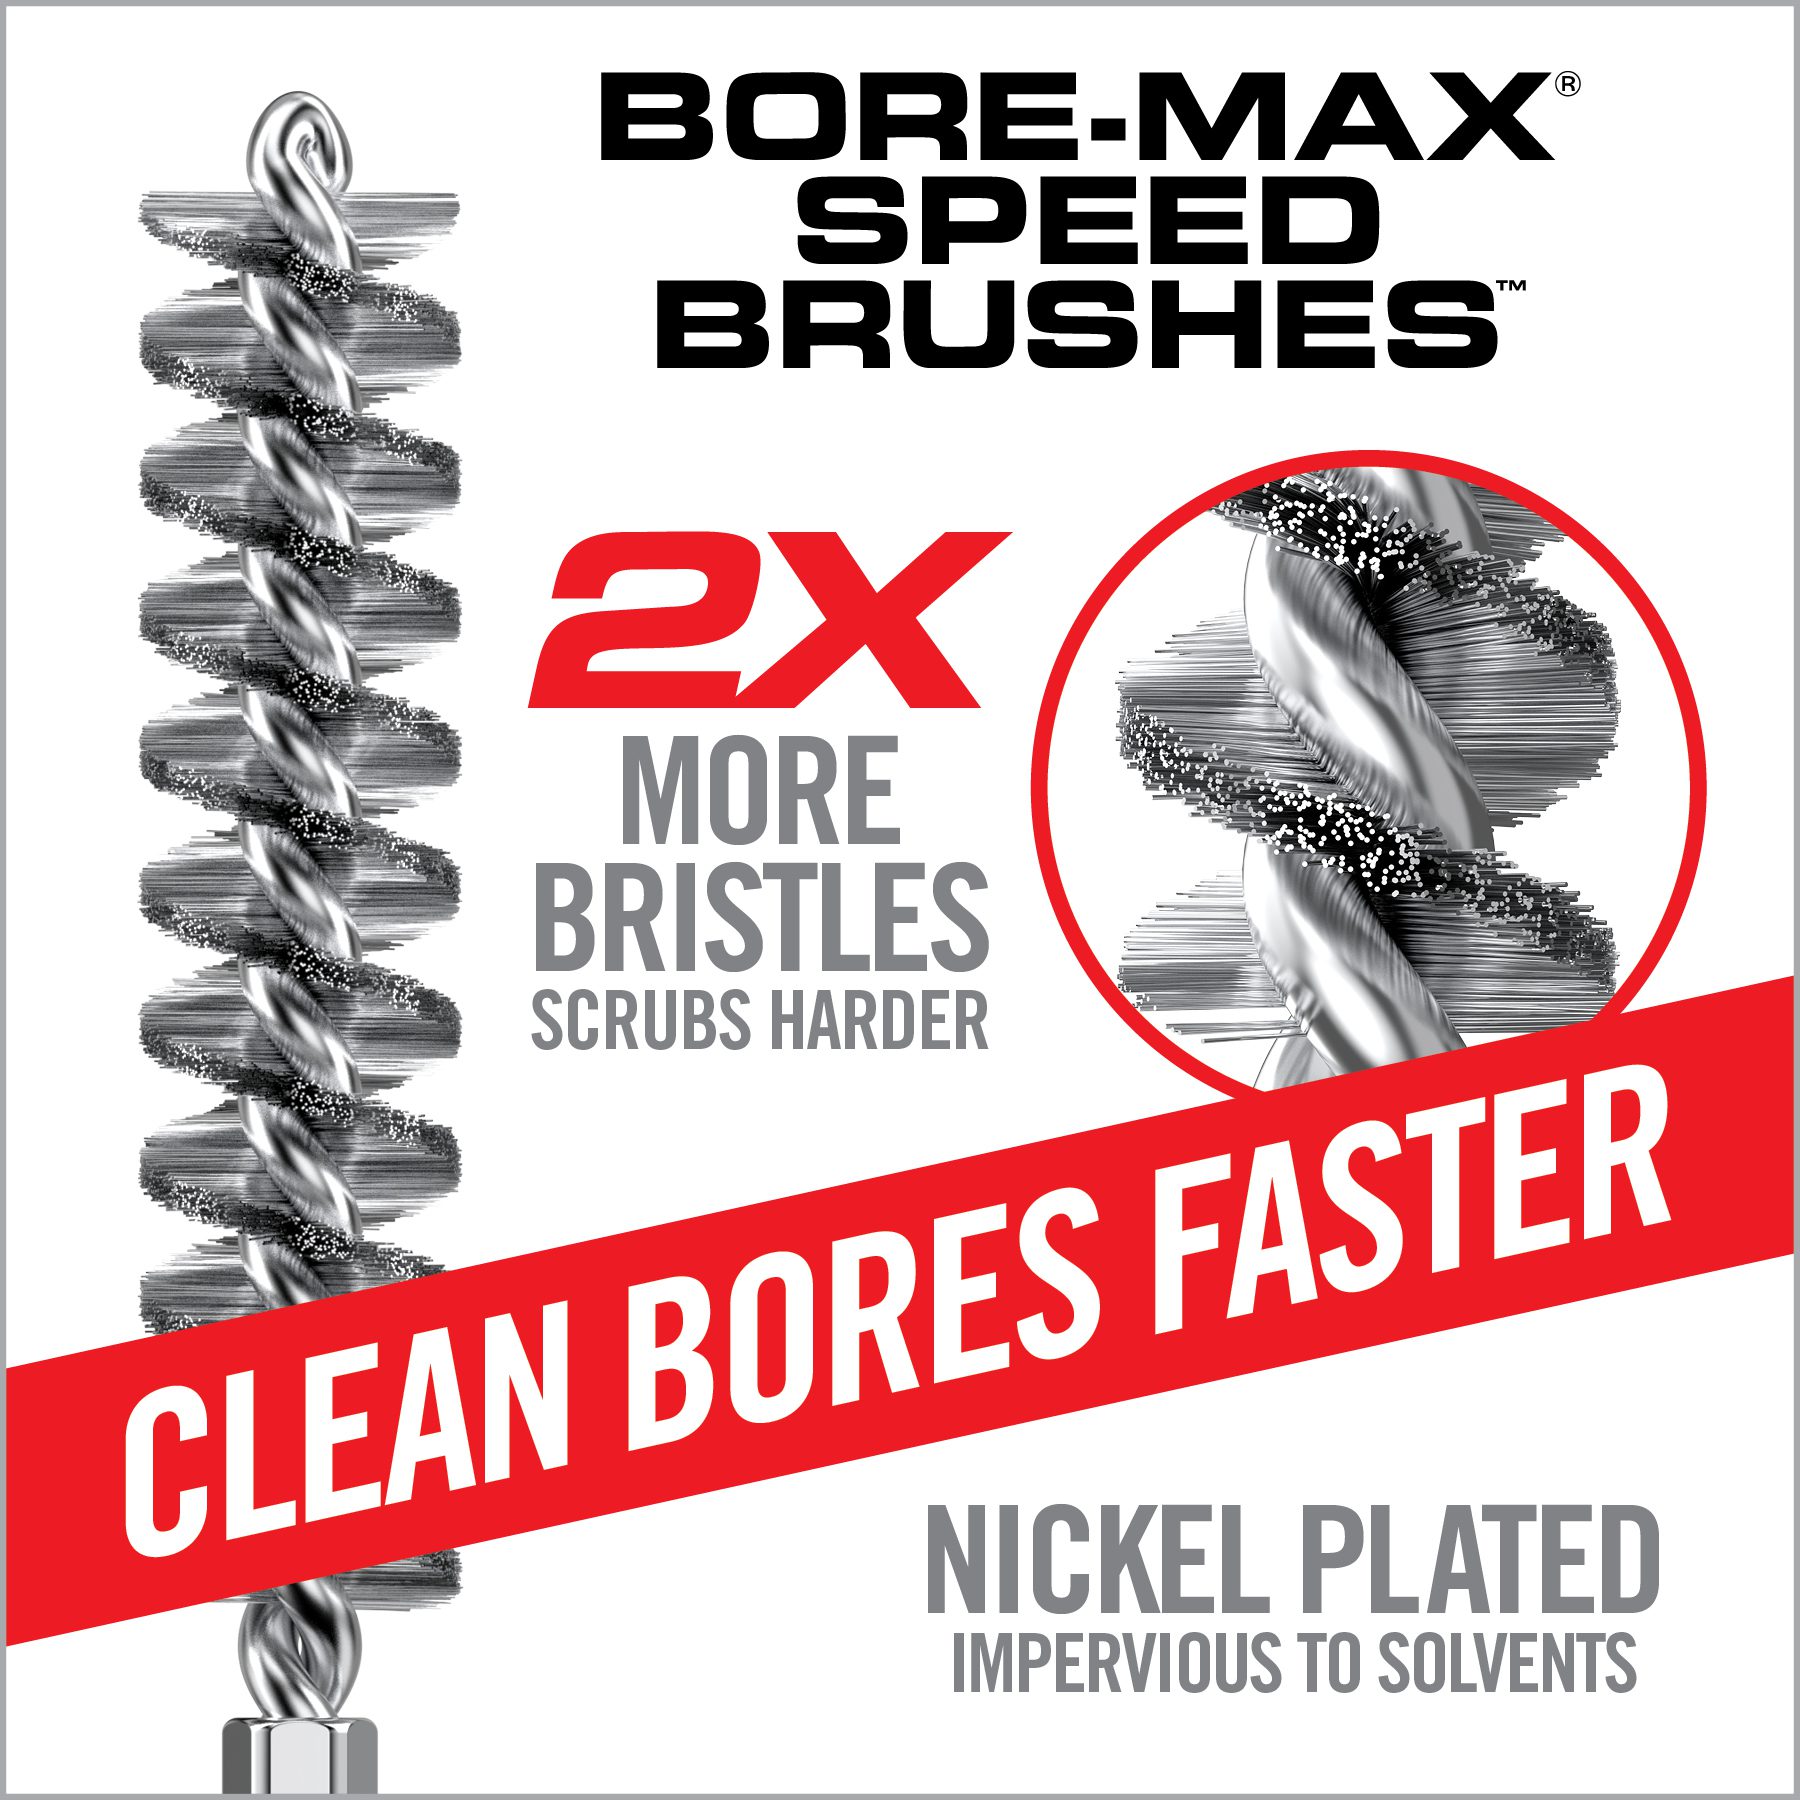 a poster advertising two more bristles scrubs faster